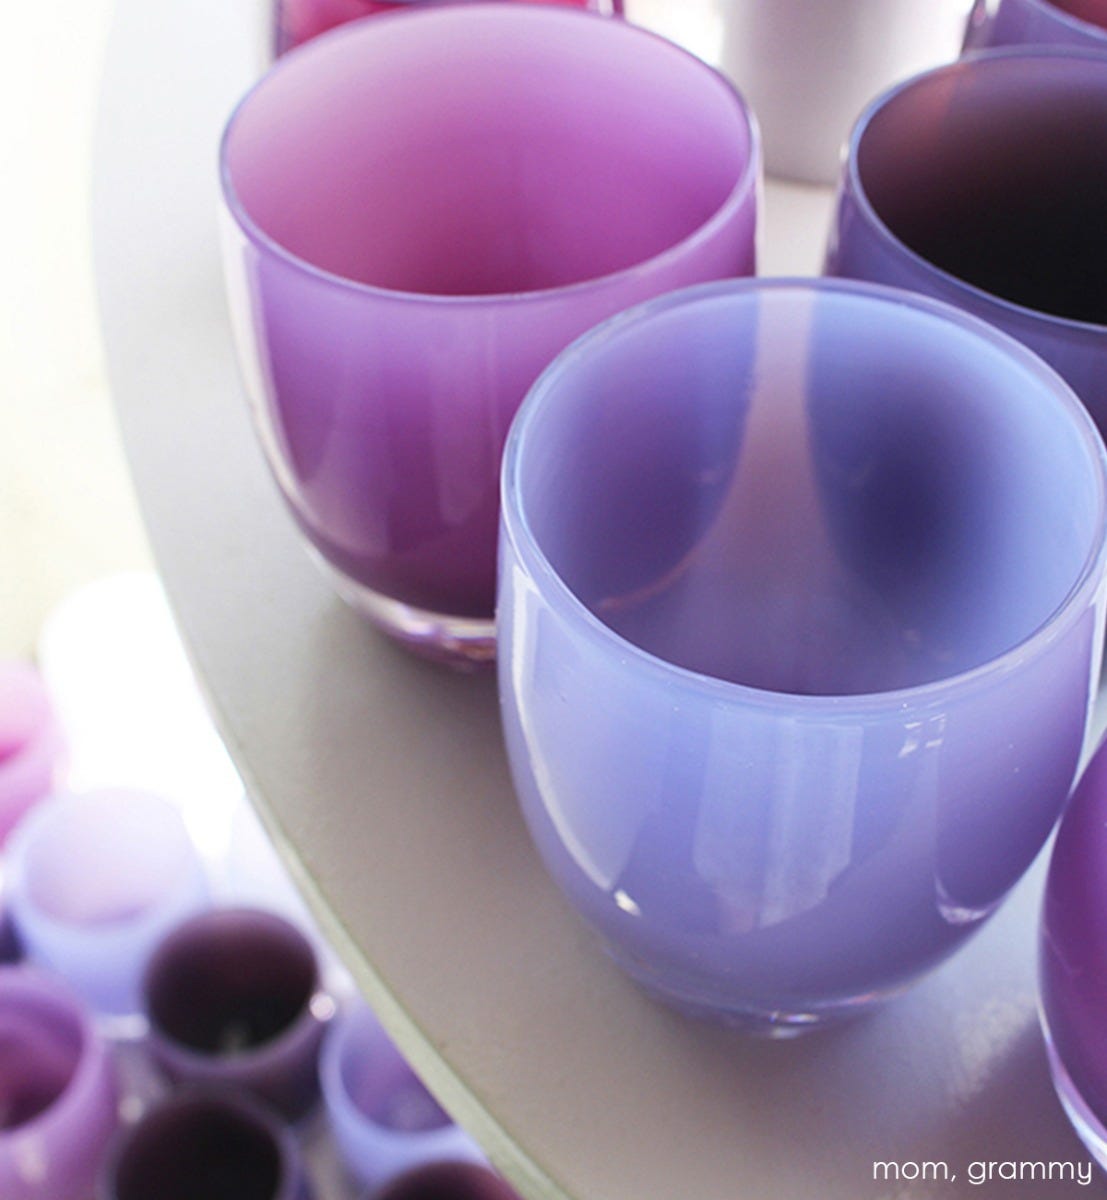 grammy, soft purple hand-blown glass votive candle holder. Paired with mom.